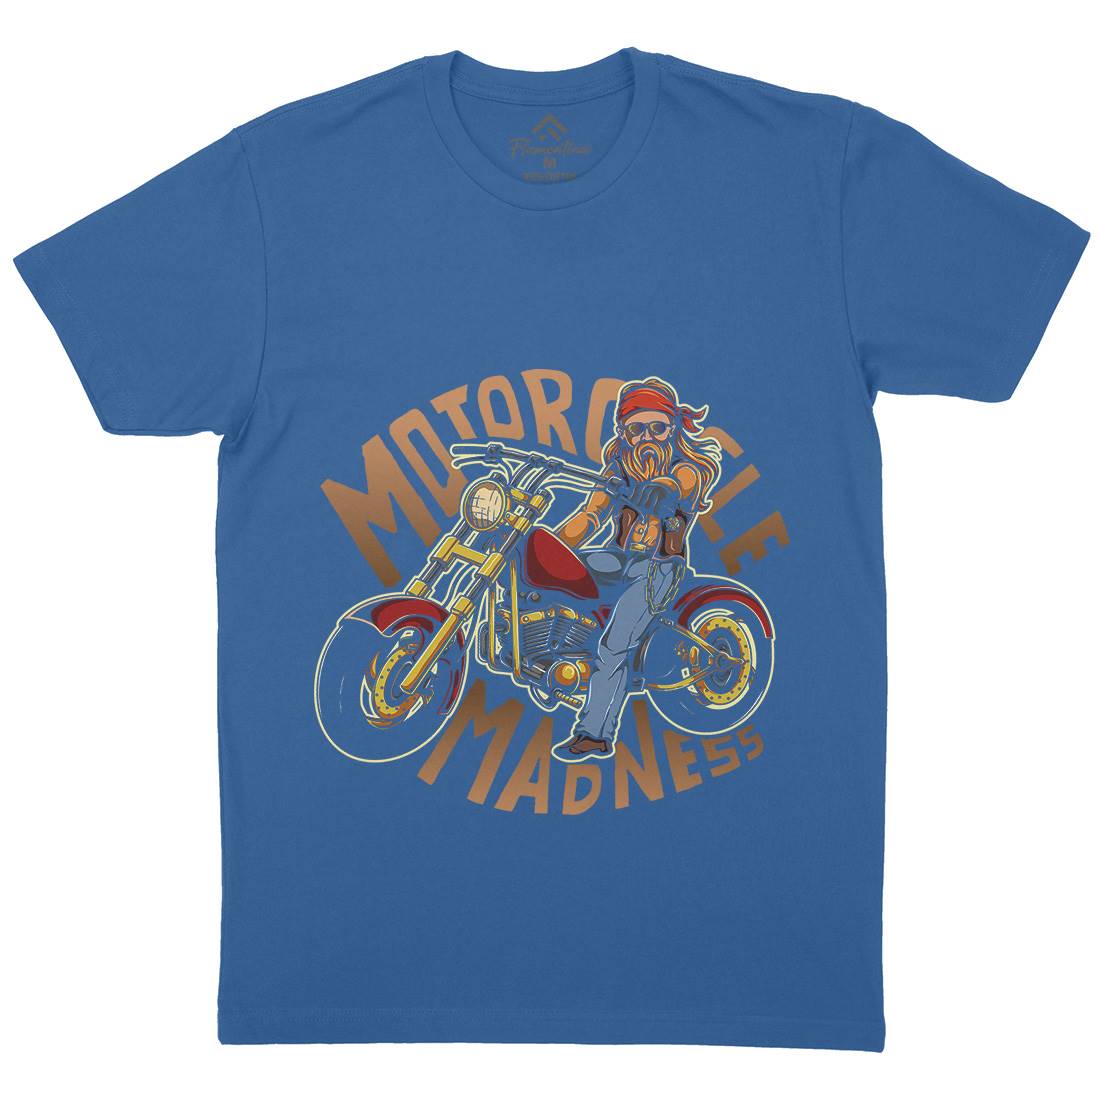 Madness Mens Organic Crew Neck T-Shirt Motorcycles A438